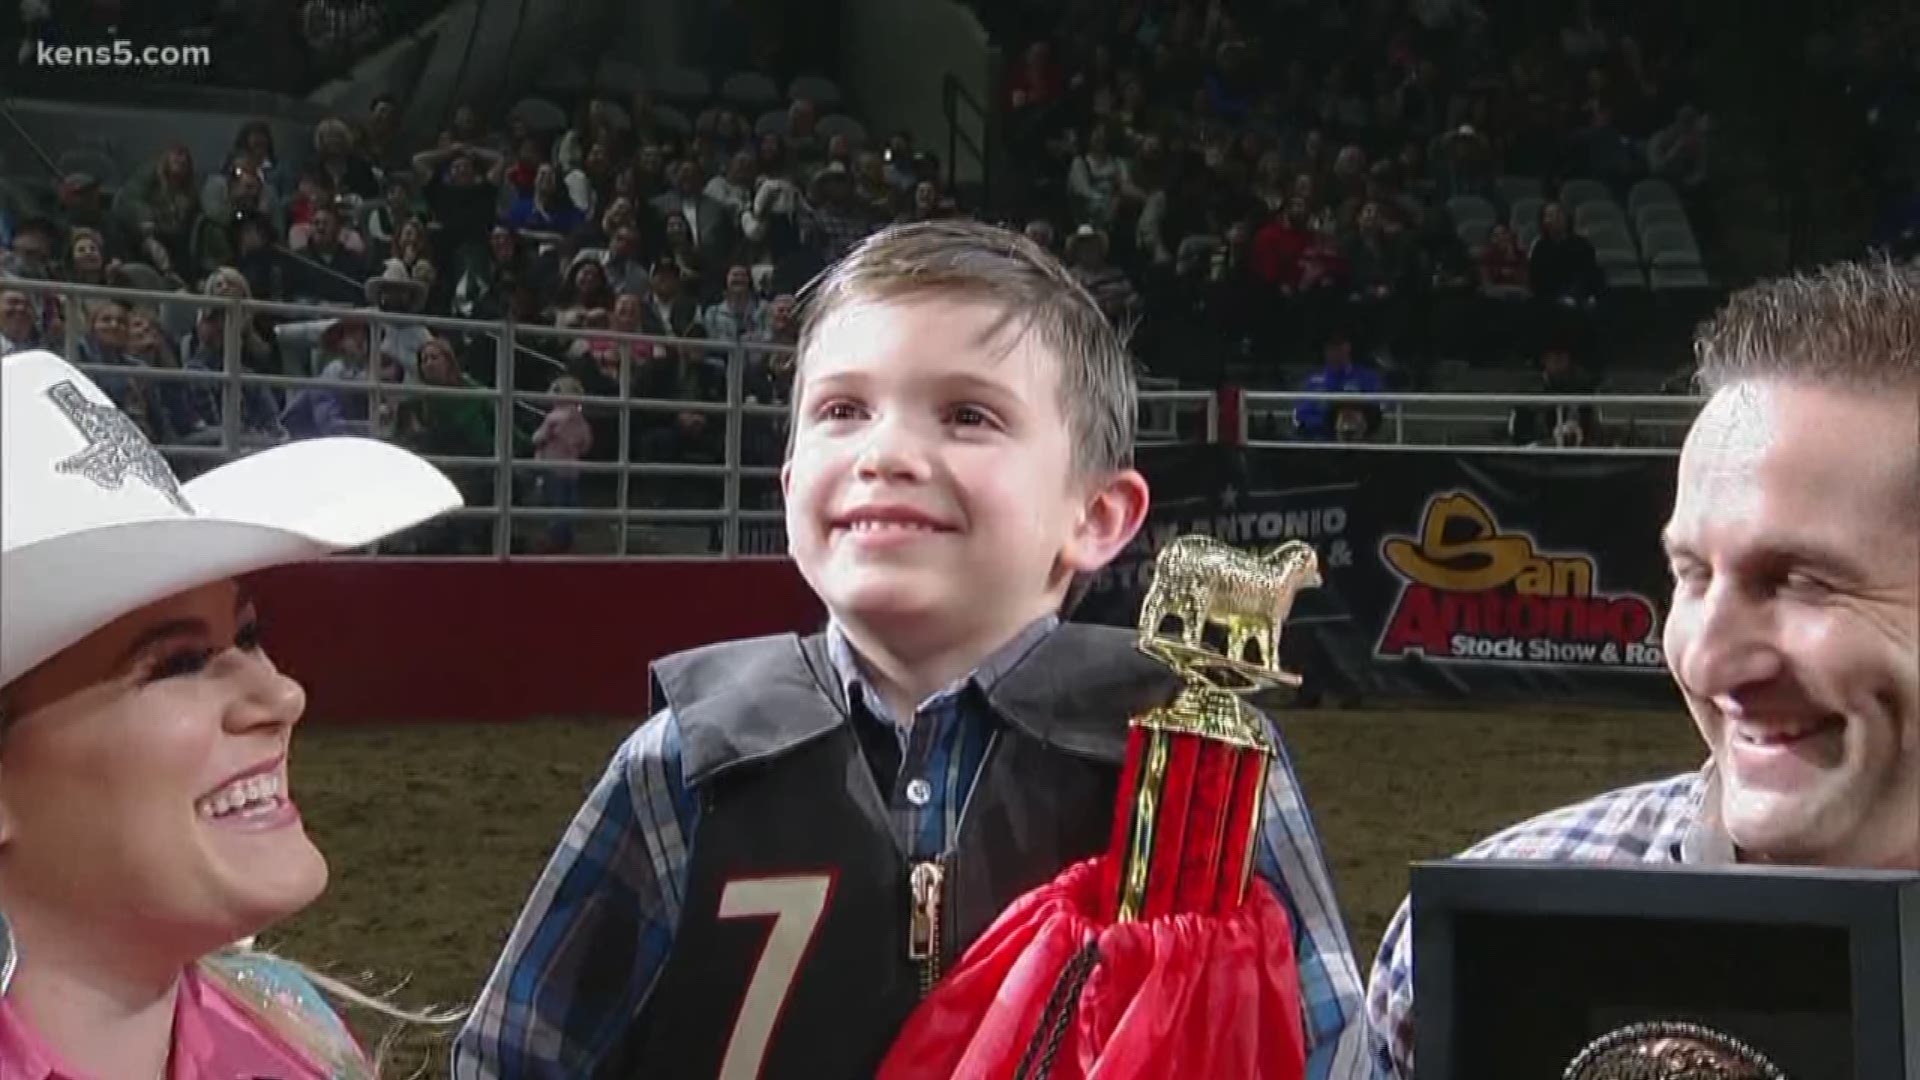 Jonah earned 81 points for holding on the entire time! Jonah dazzled the crowd with a wave, bow... and some dance moves. During the trophy ceremony he gave a big, toothy grin to all his fans.